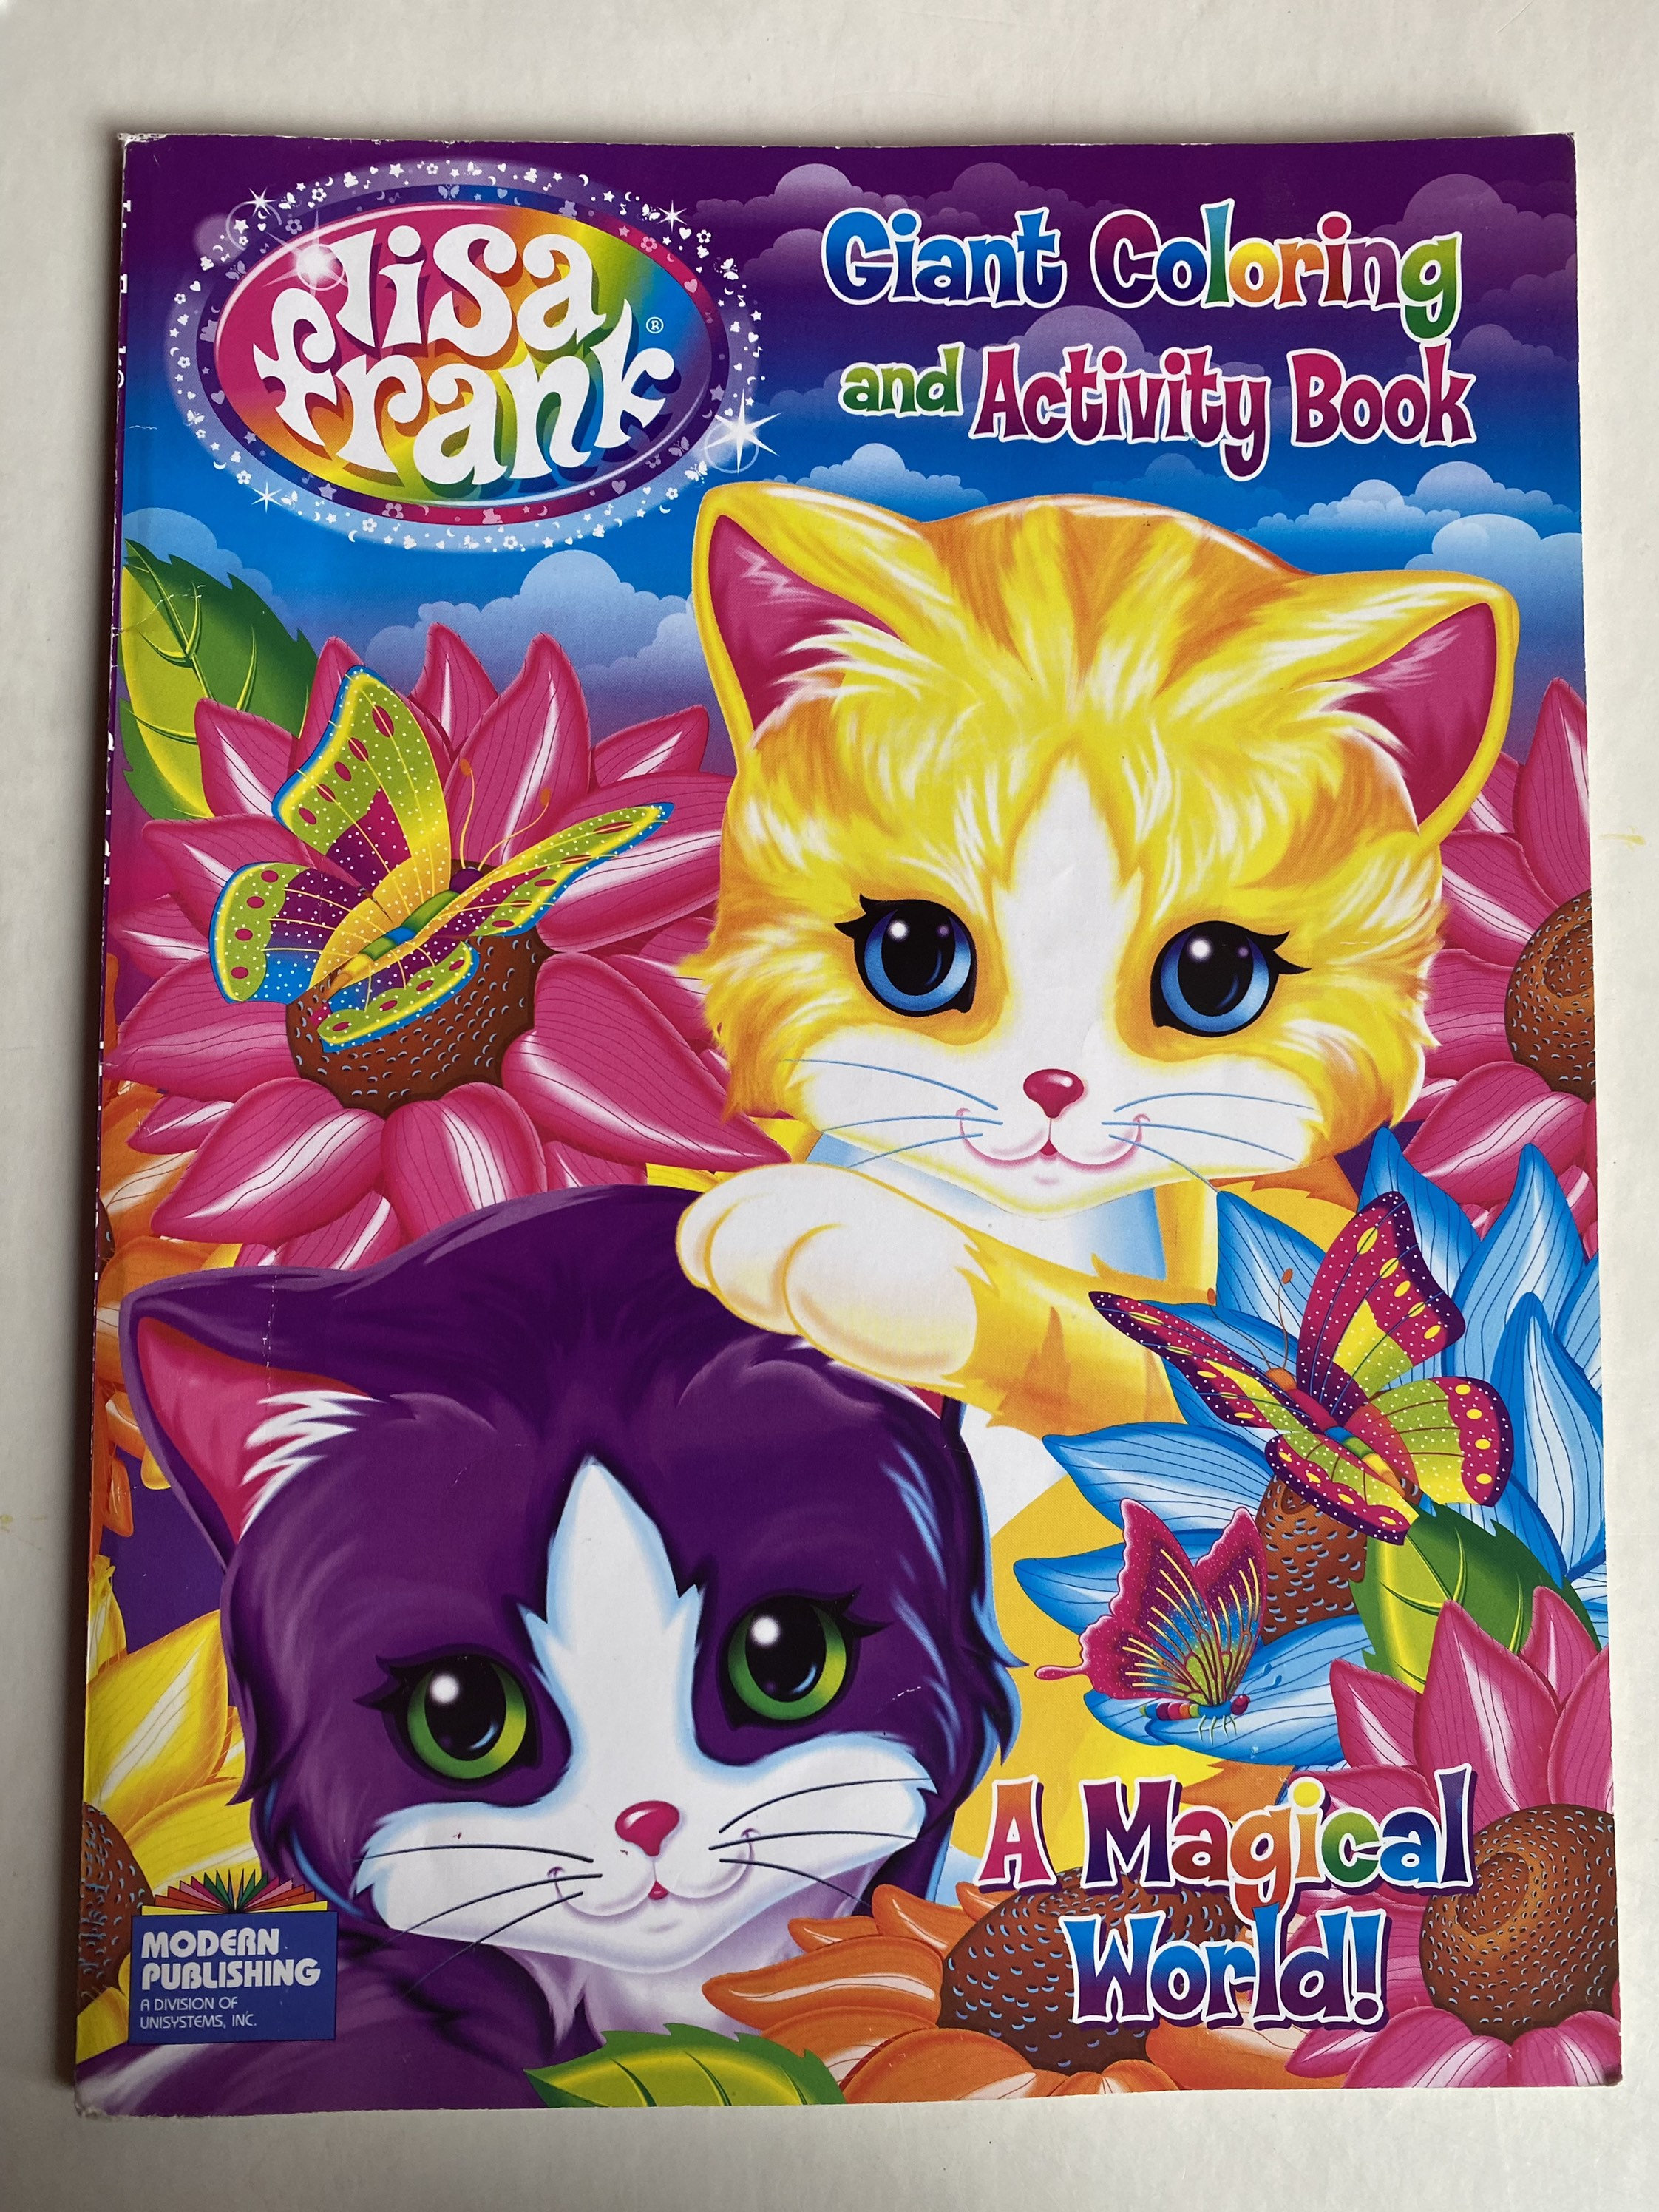 Loving this Lisa Frank coloring book found at dollar store : r/Coloring